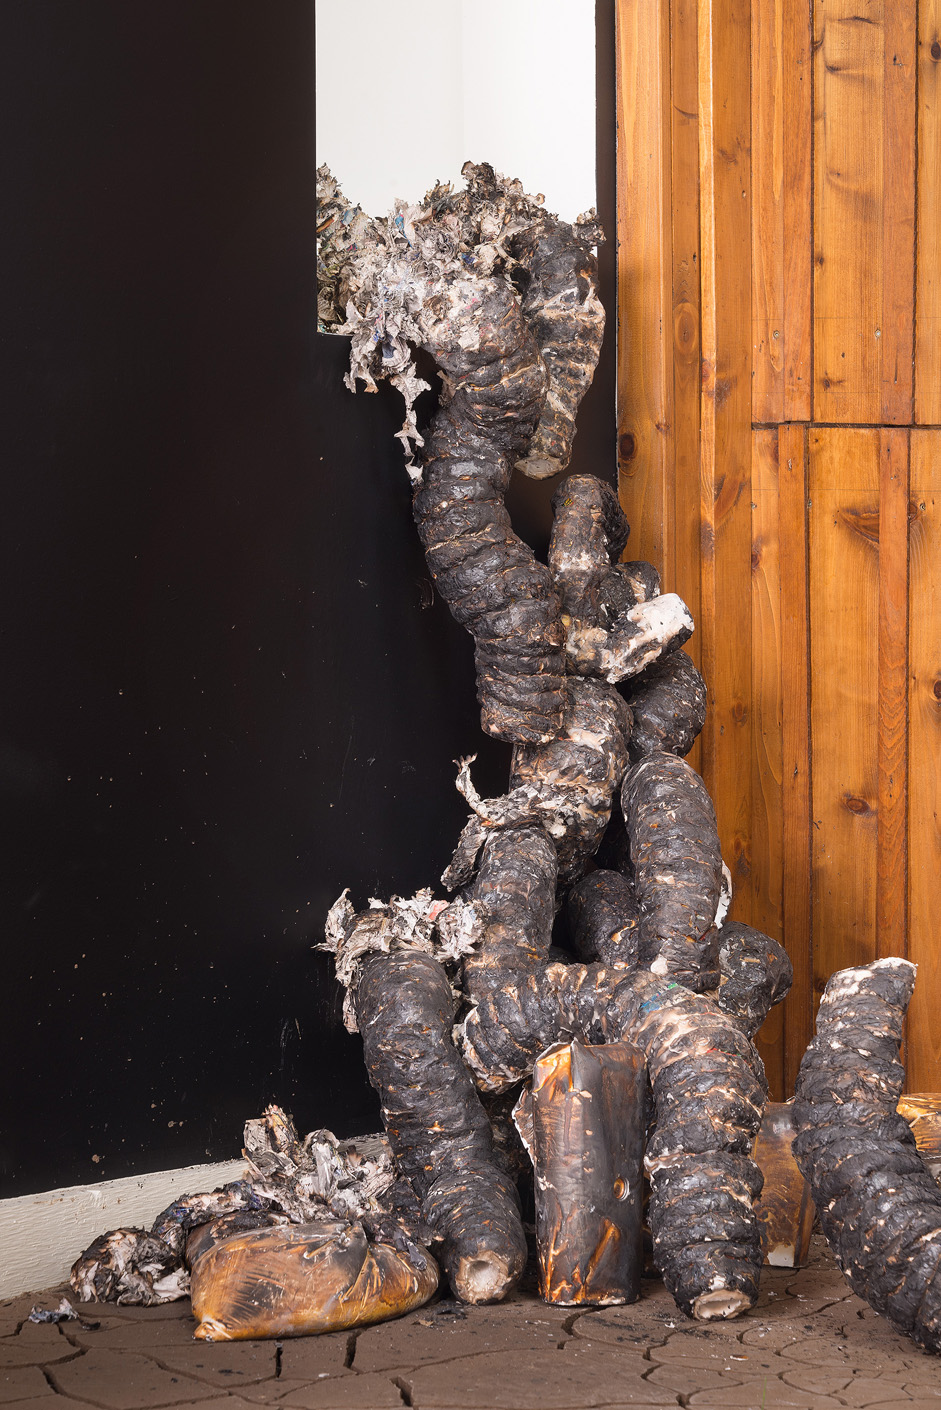  Installation detail of charred organic forms shedding their skins as they “climb” through window. 